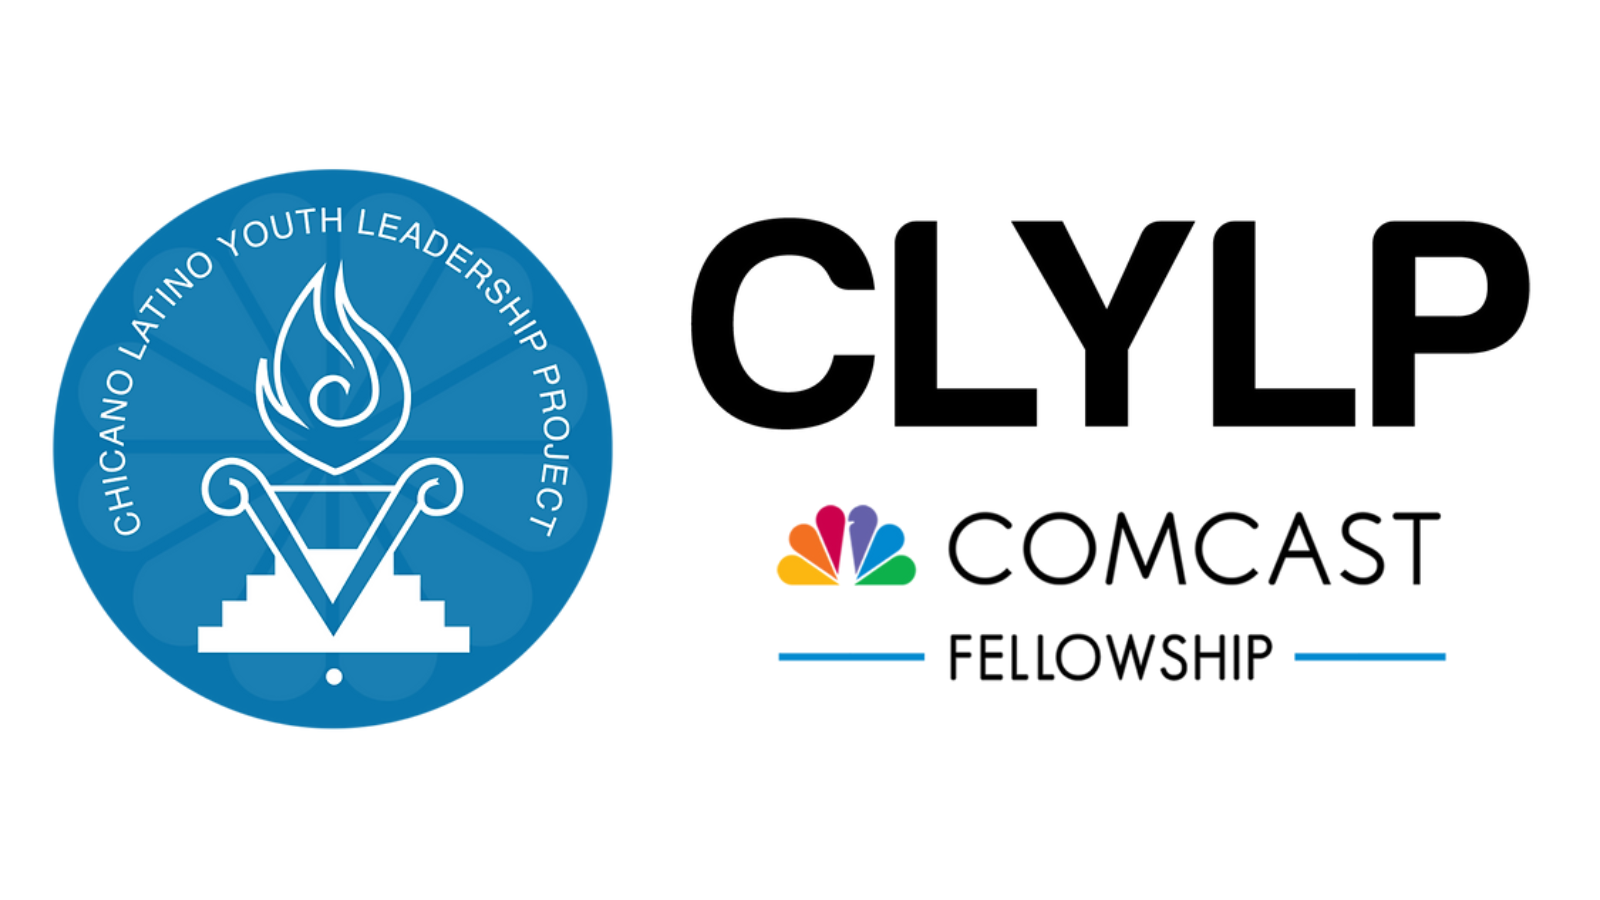 Comcast CLYLP Fellowship Kicks Off its 14th Year with a Welcome Event